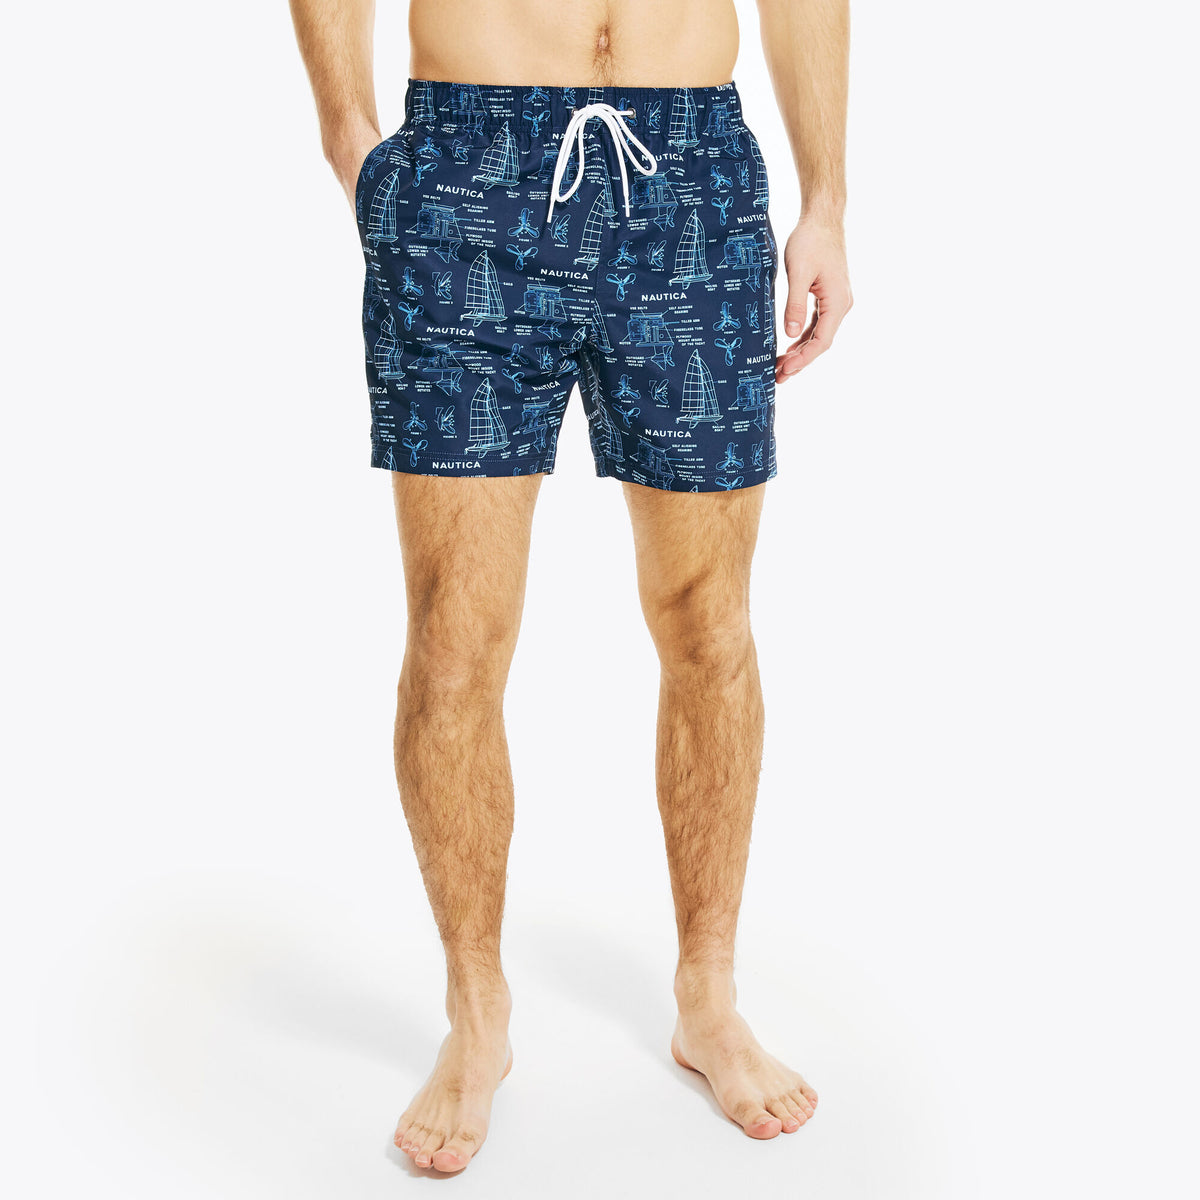 Nautica Men's 8" Big & Tall Sustainably Crafted Boat Print Swim Navy